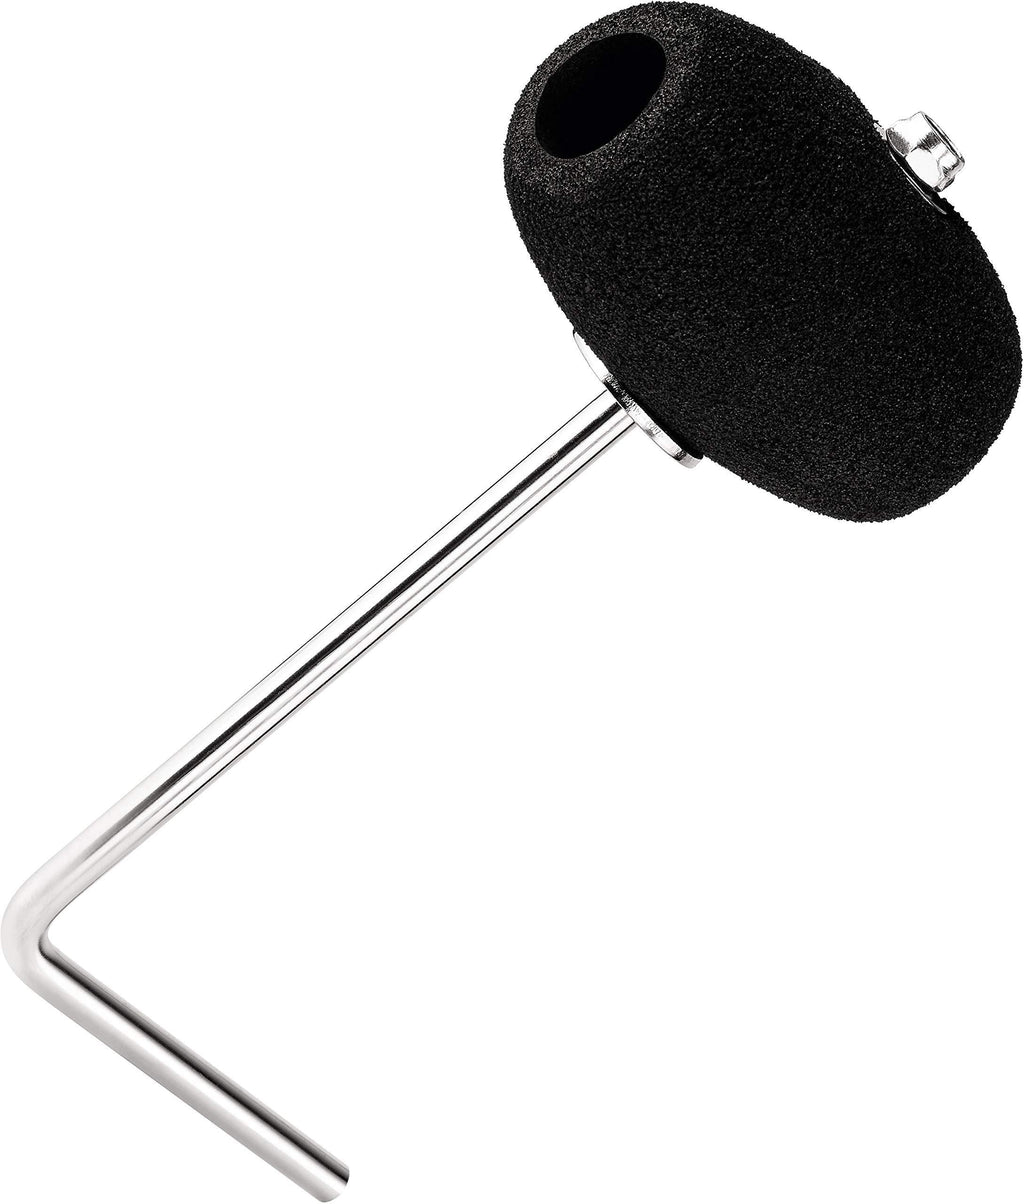 Meinl Percussion L-shaped Beater for BassBox/SnareBox, Hammer Head Design with Soft Foam Rubber (BBB3)